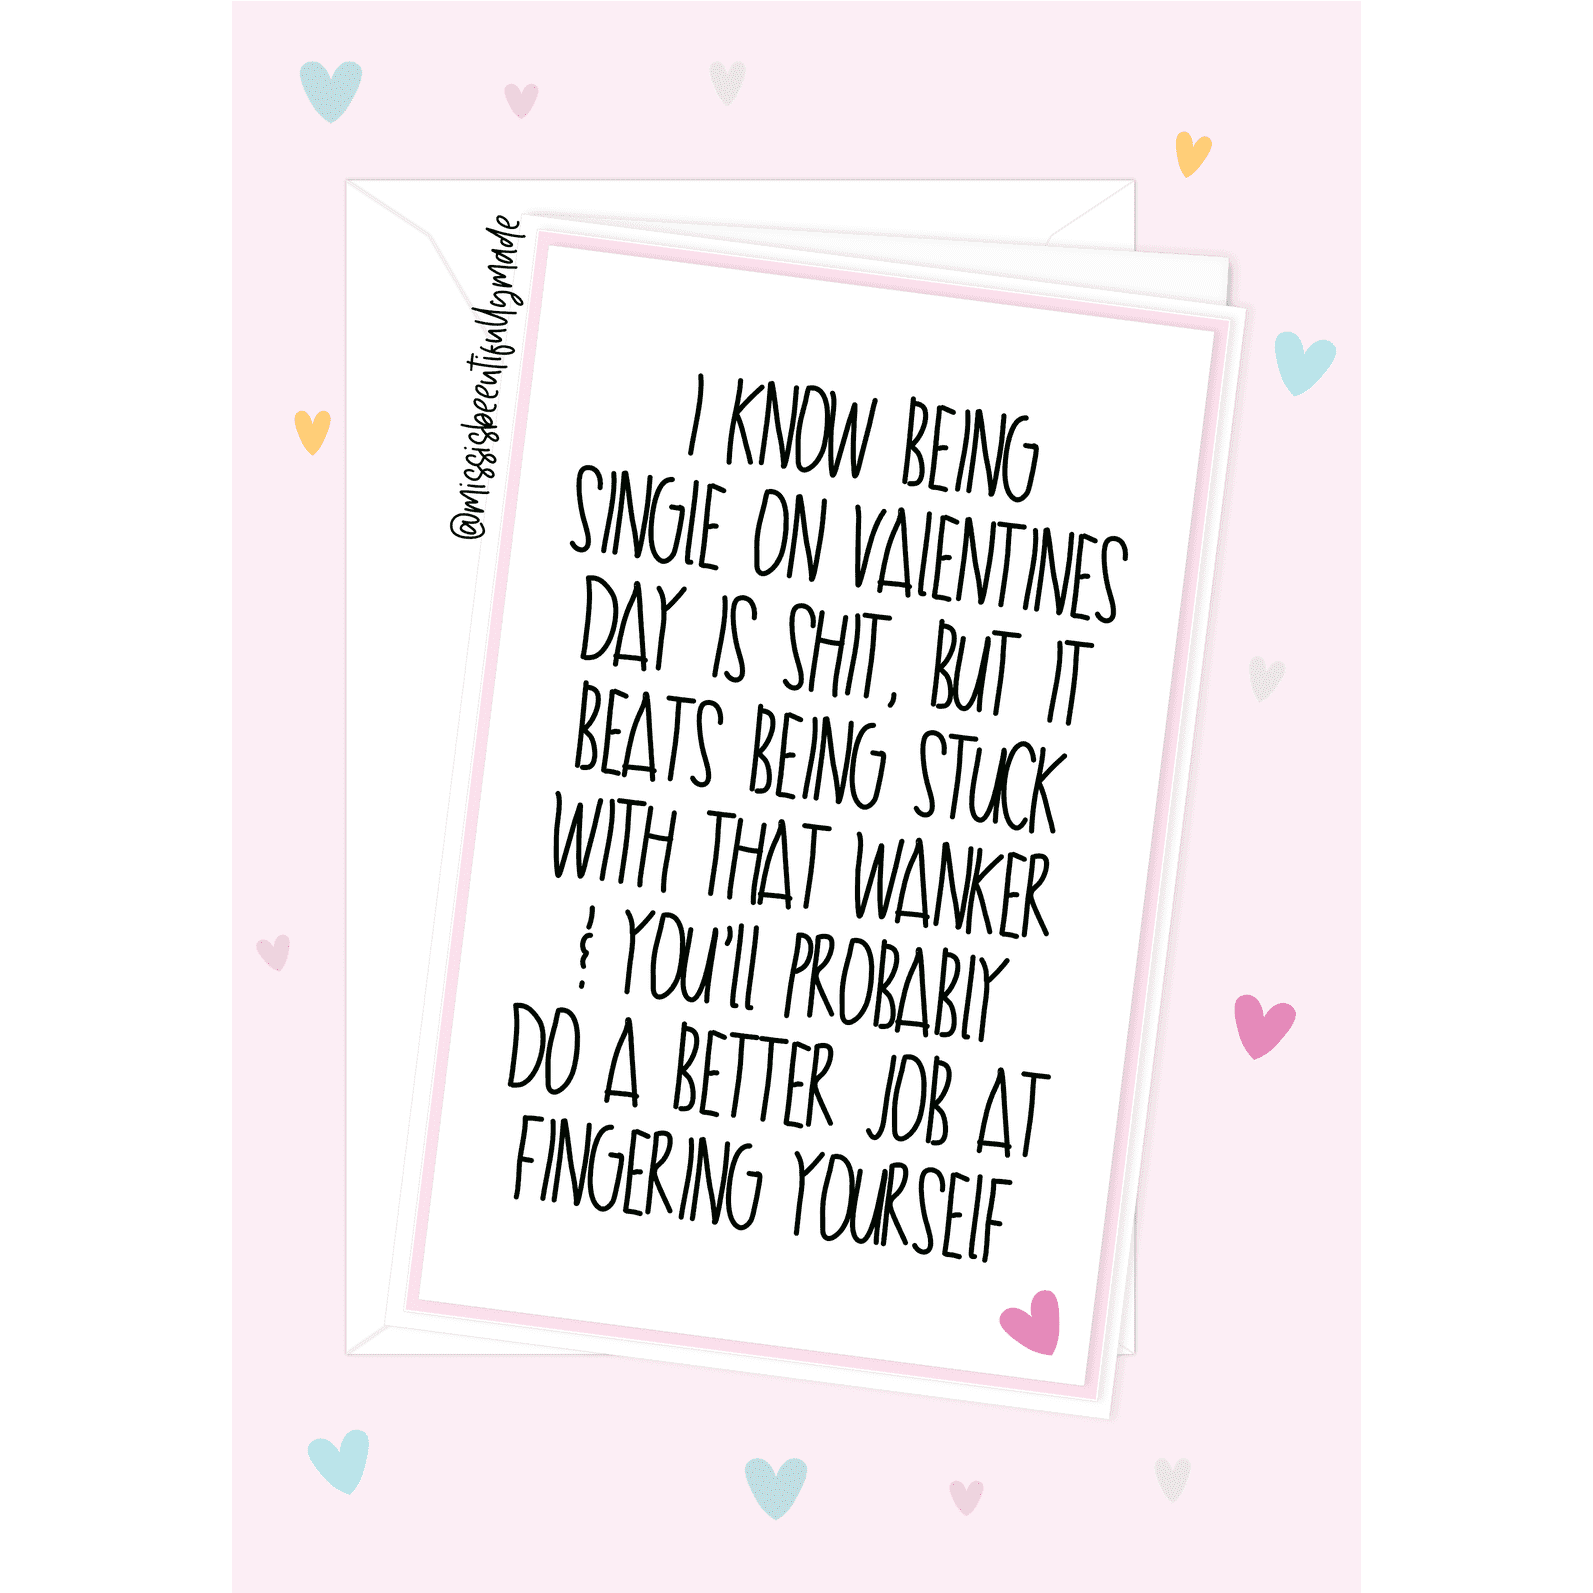 A5 glossy card featuring the funny quote 'I know being single on valentine's day is shit, but it beats being stuck with that wanker & you'll probably do a better job at fingering yourself.' Pink border around the edge.